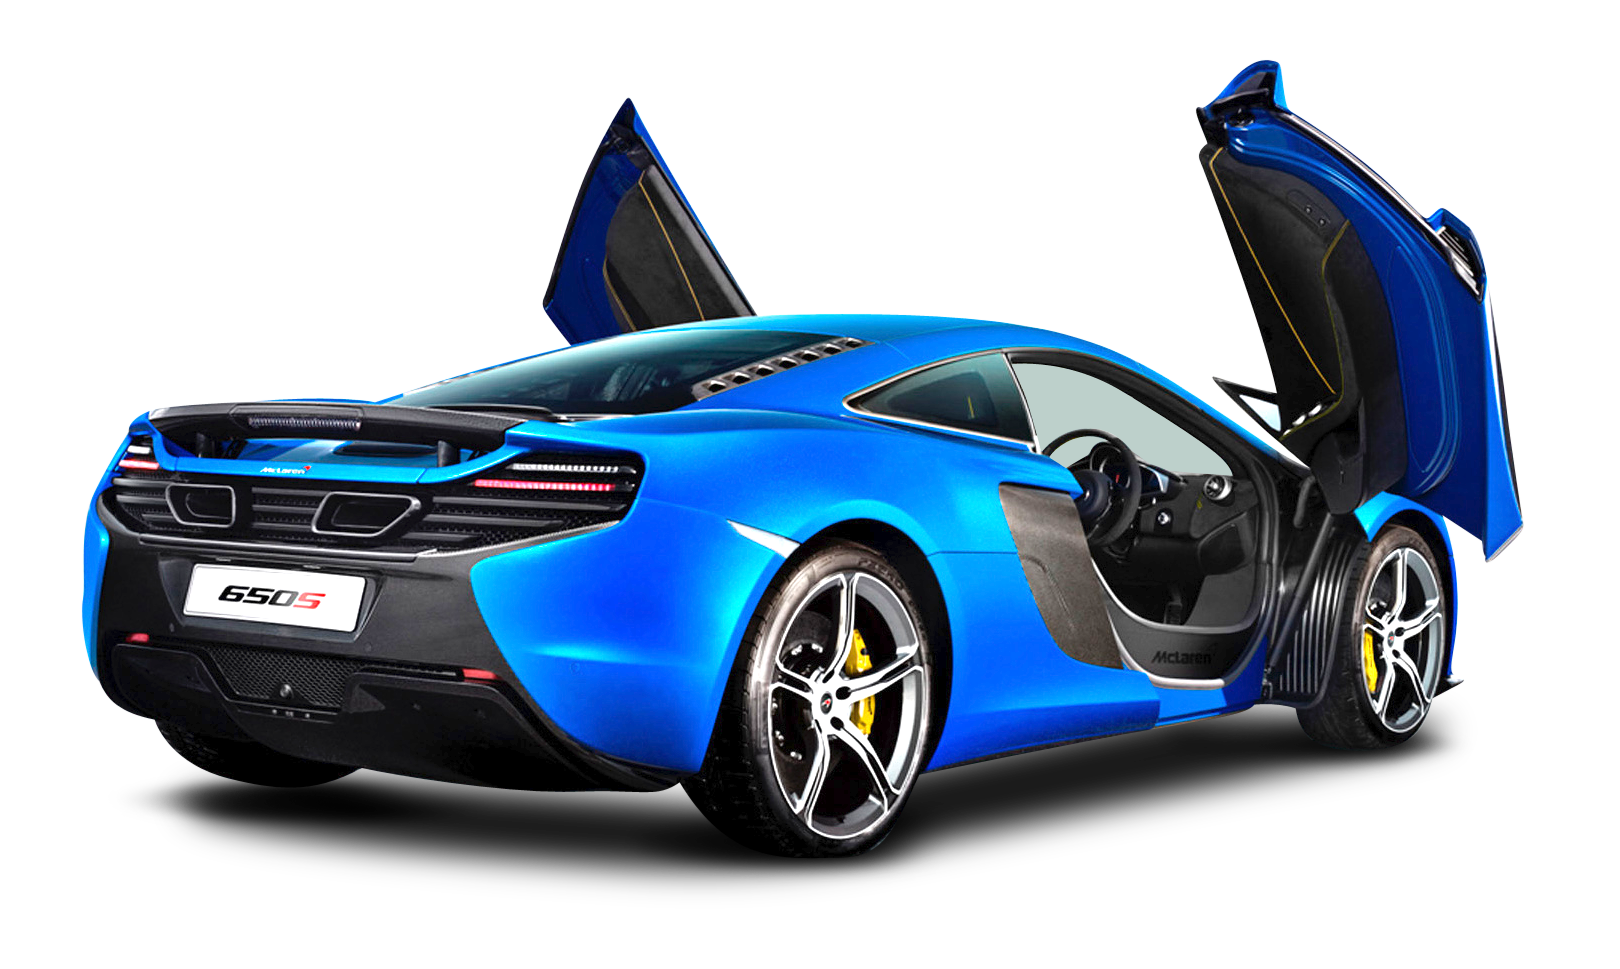 McLaren 650S PNG High-Quality Image